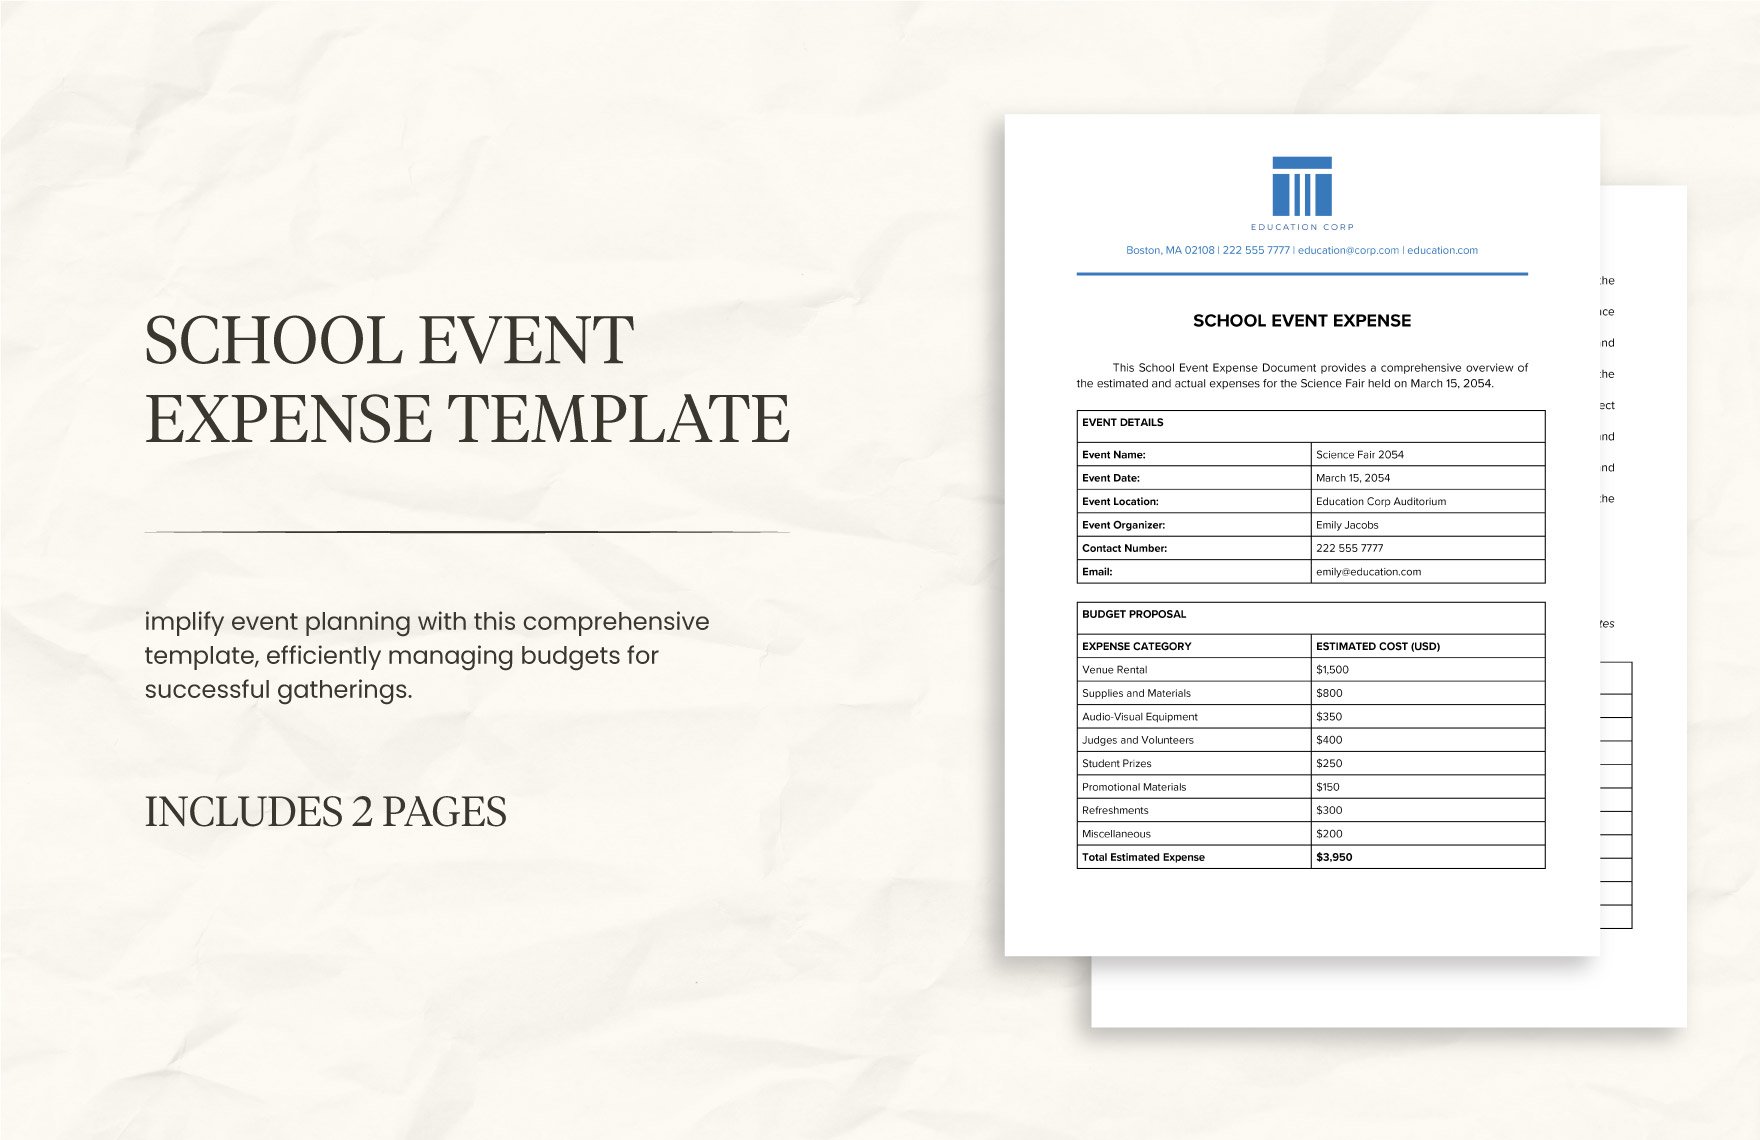 School Event Expense Template in Word, Google Docs, PDF